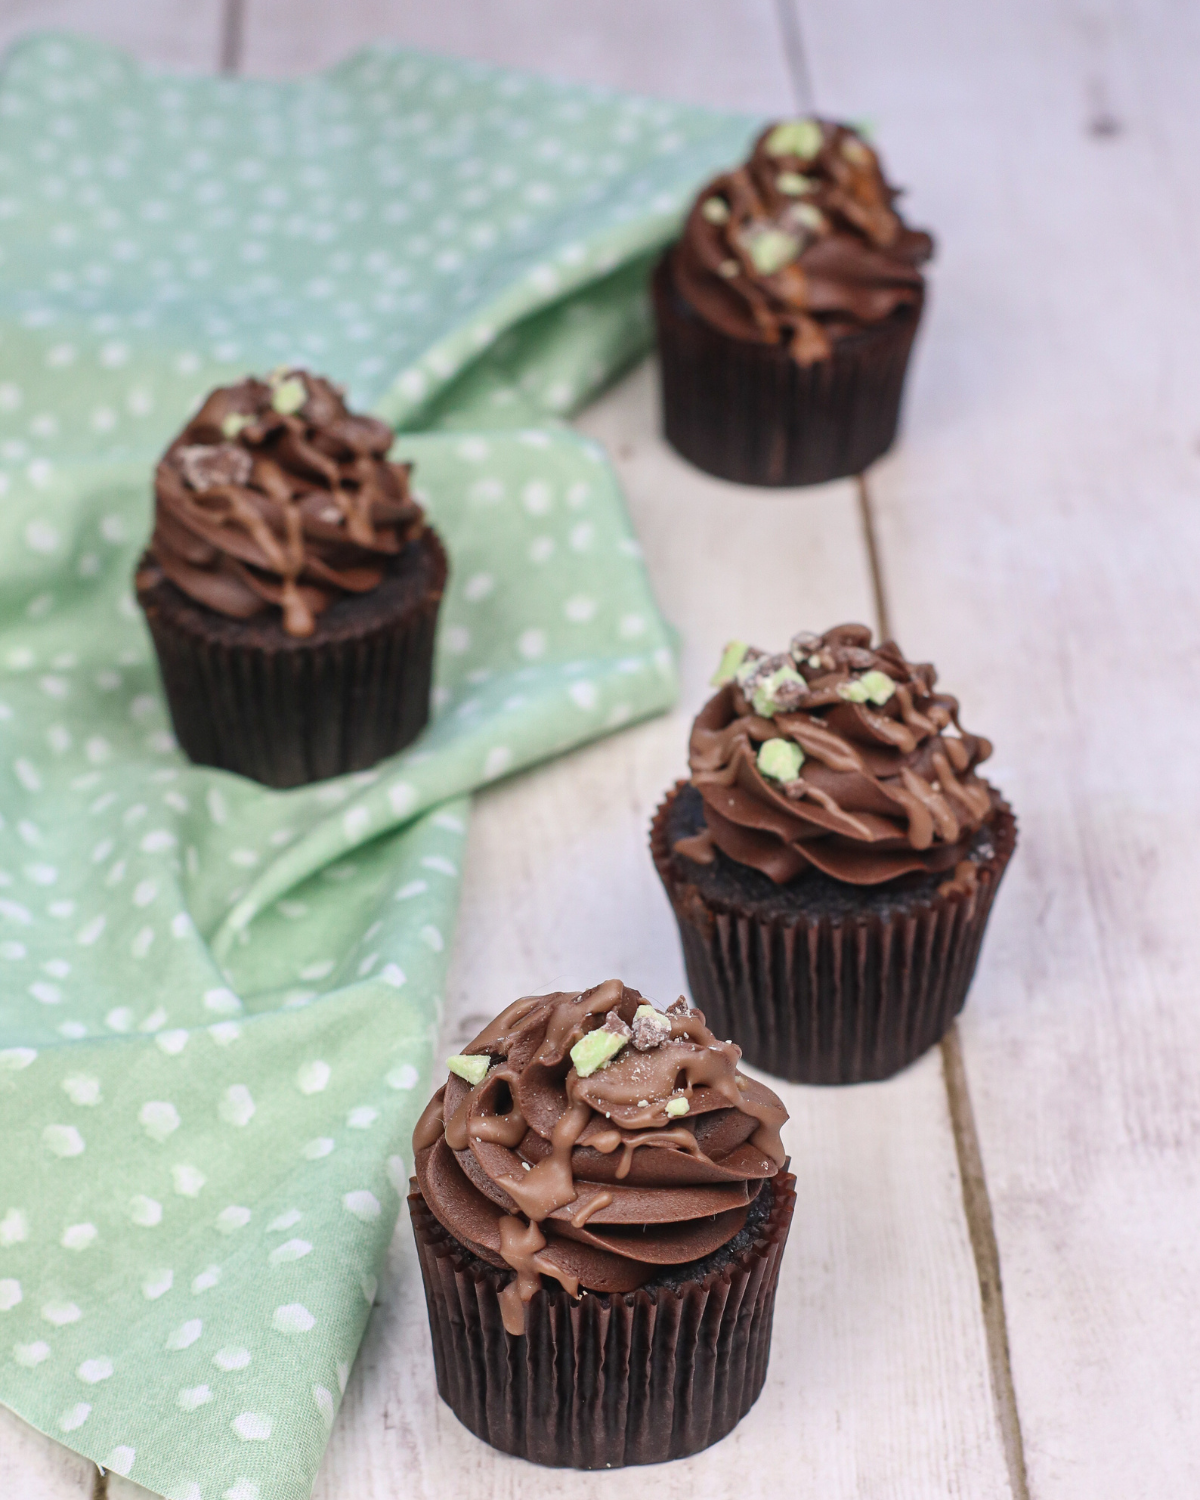 mint chocolate cupcakes on a wood table and green and white cloth.